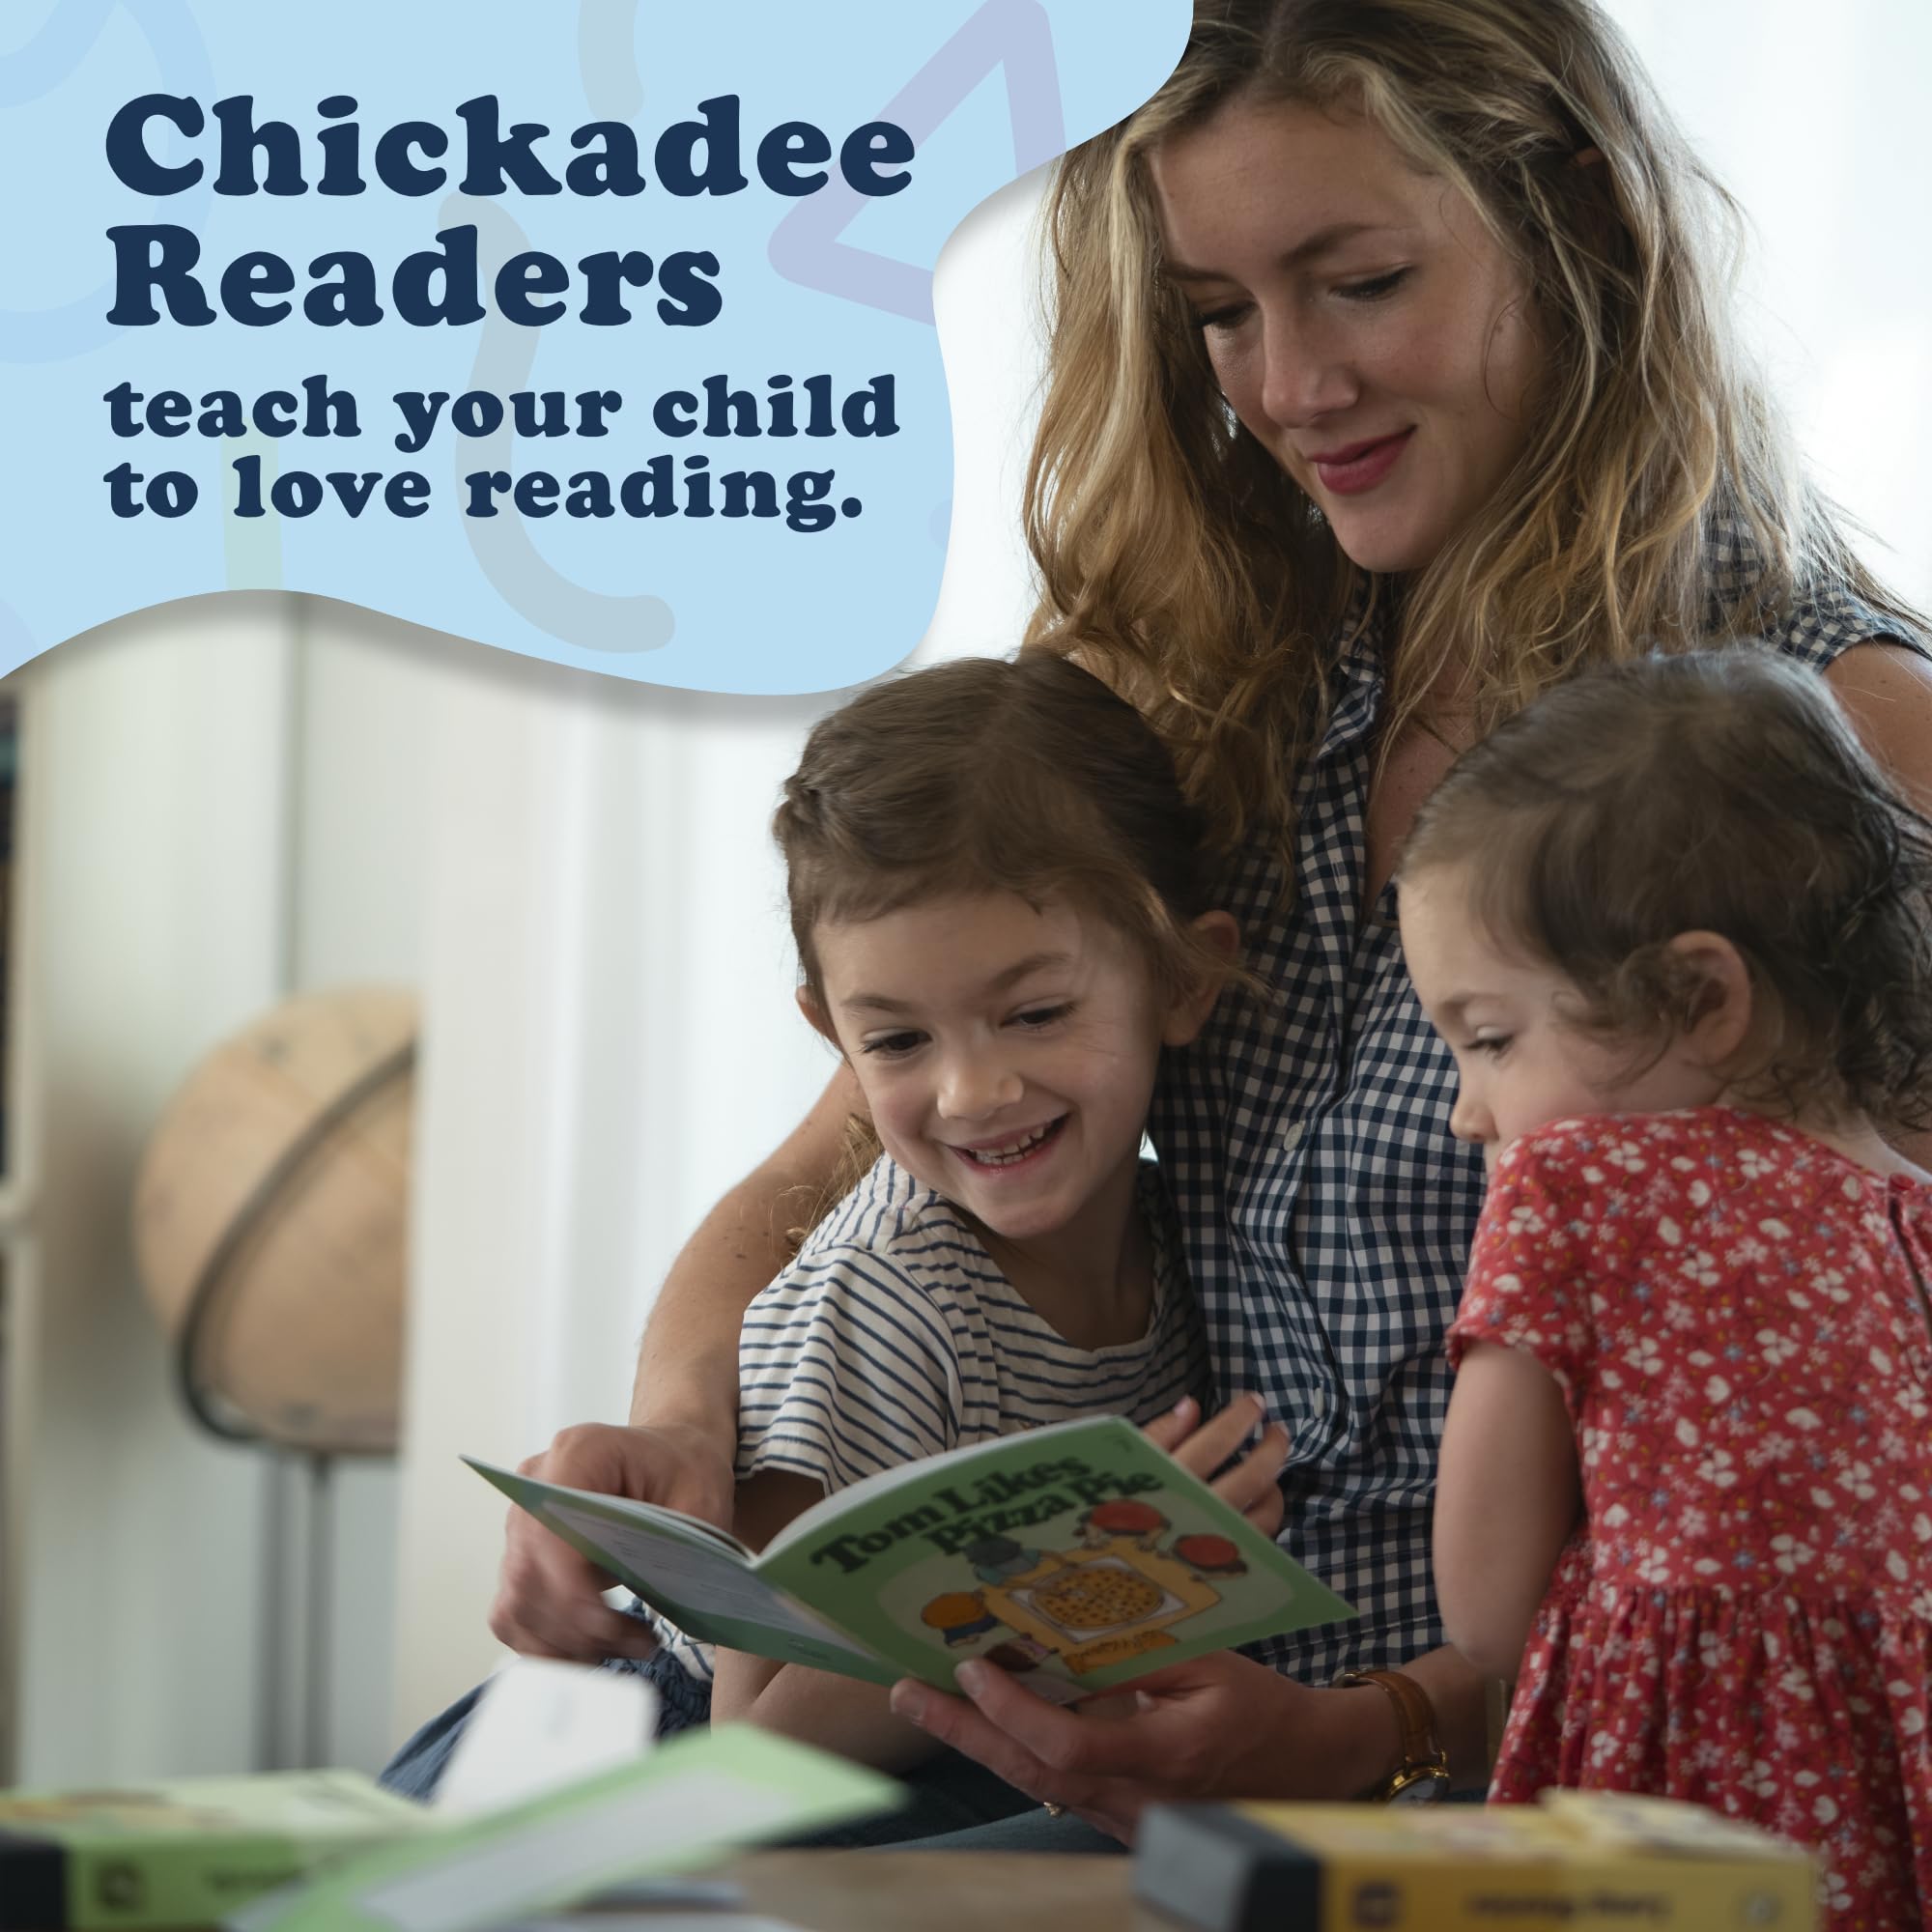 Chickadee Readers: My First Stories (Sets 1-4) Learn to Read Books Progressing from Lexile Measures 80L to 560L, Sight Word Books, Illustrated Kids Reading Books, Interactive Reading Books for Kids